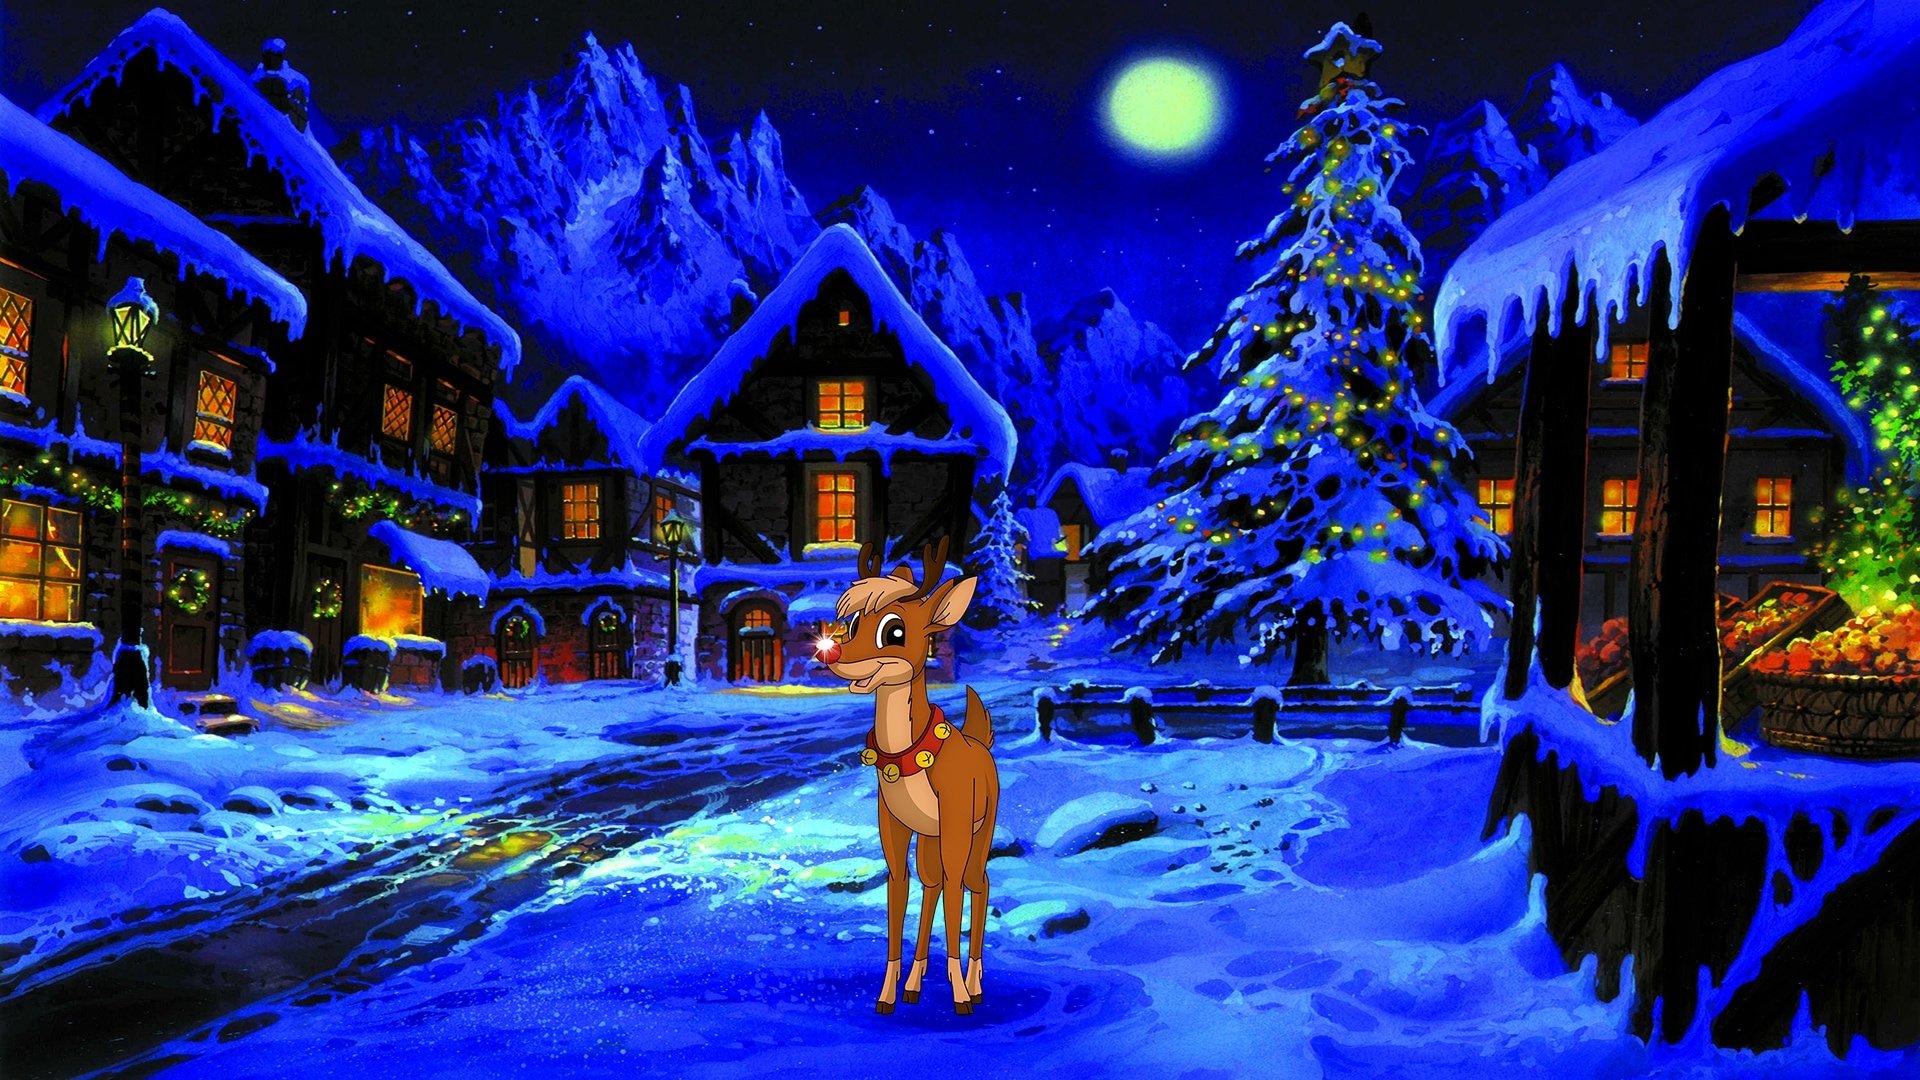 Rudolph The Red Nosed Reindeer Wallpapers